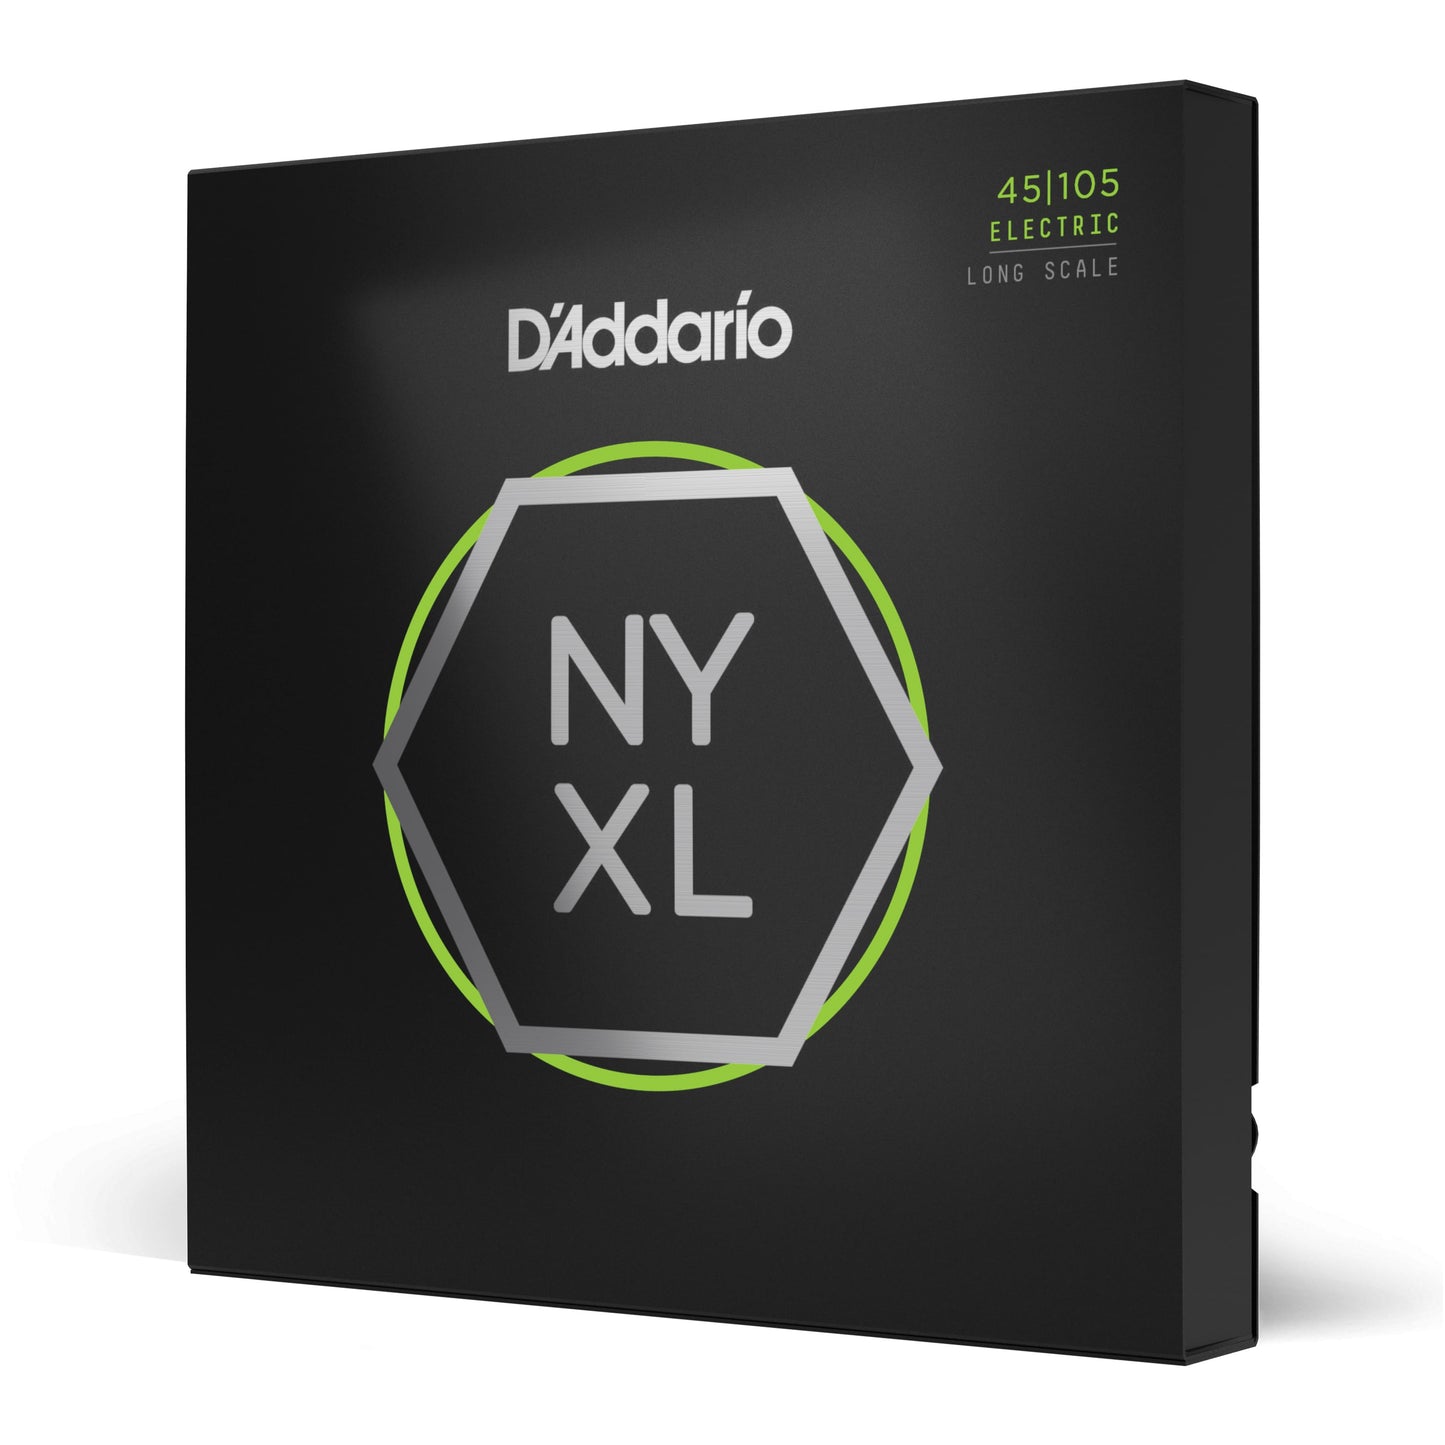 D'Addario NYXL45105 Long Scale Nickel Wound Electric Bass Strings